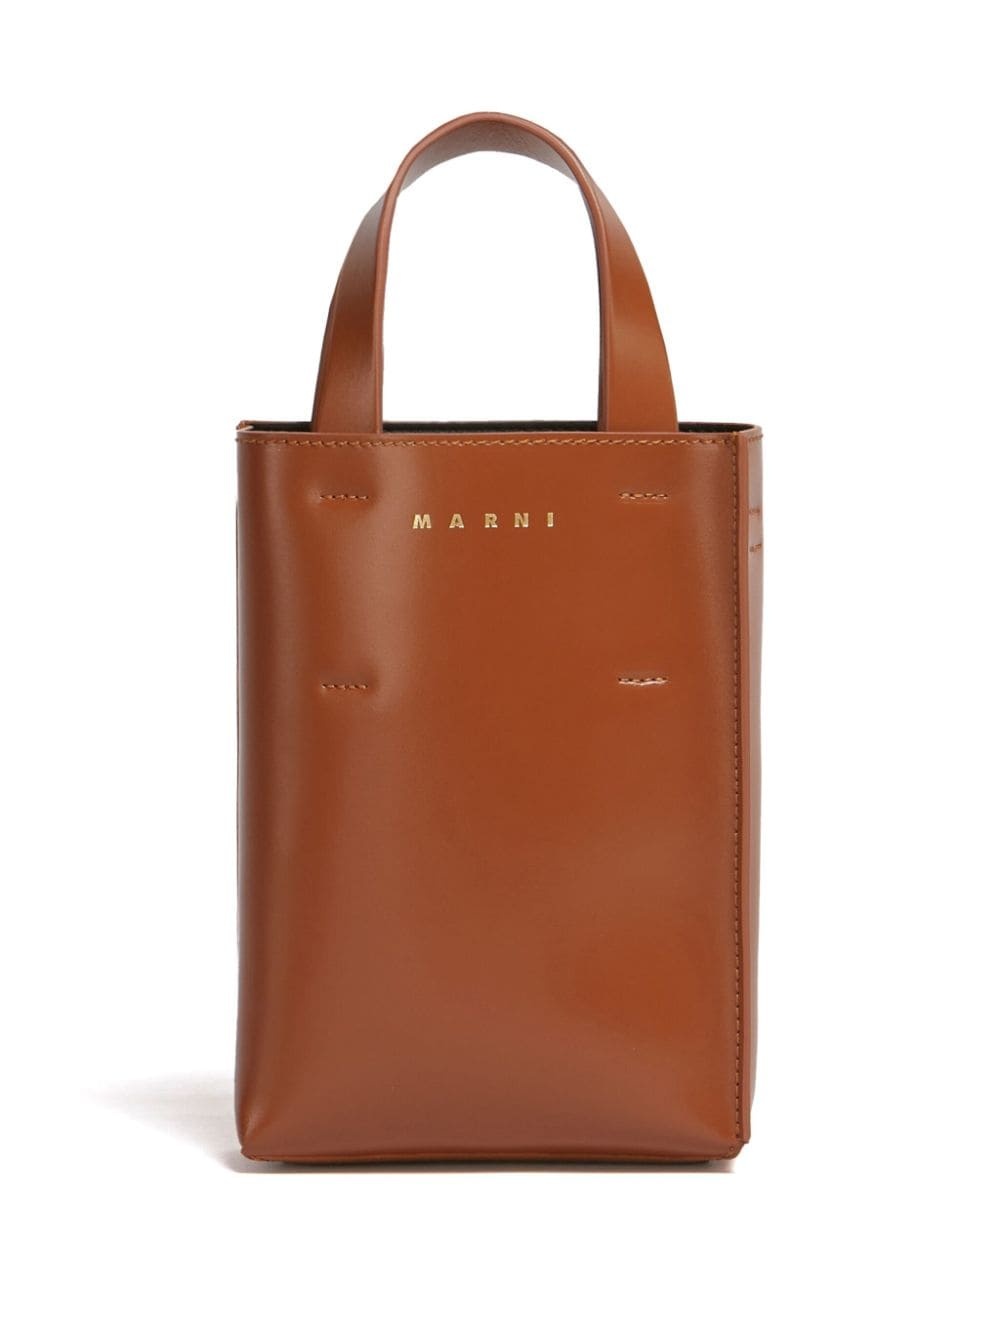 engraved-logo leather tote - 1